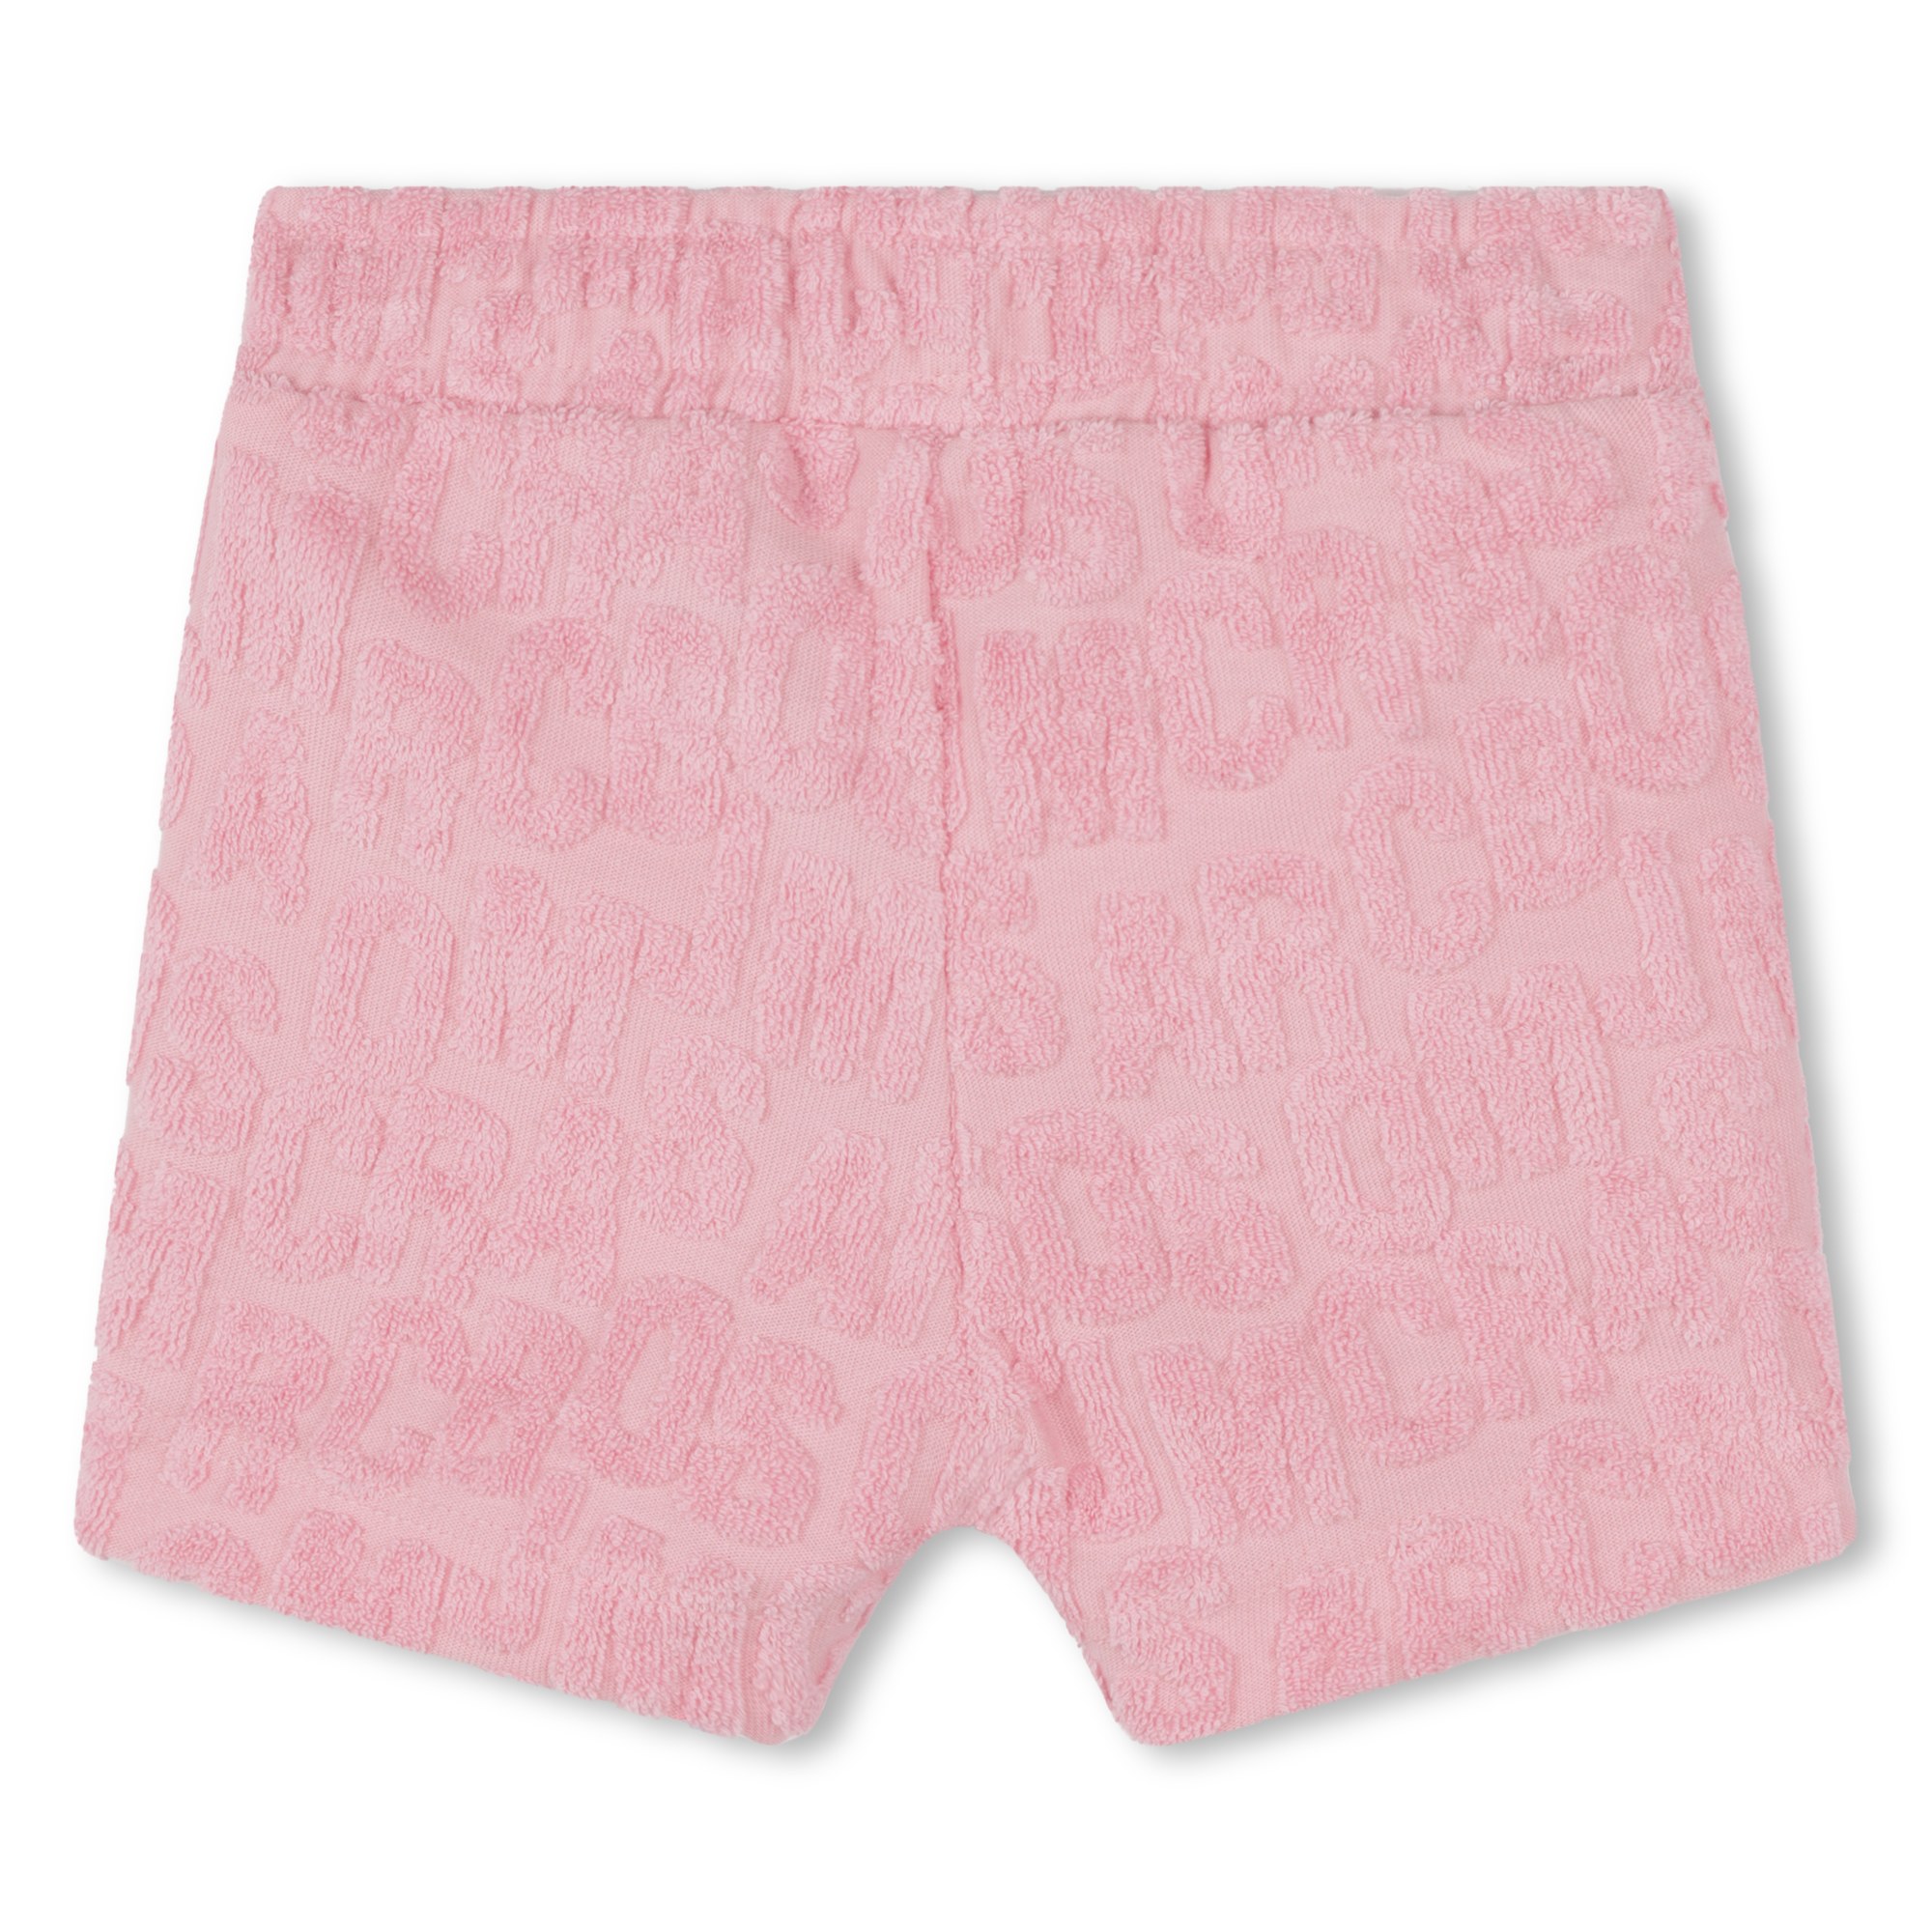 Cotton and terry towel set MARC JACOBS for UNISEX